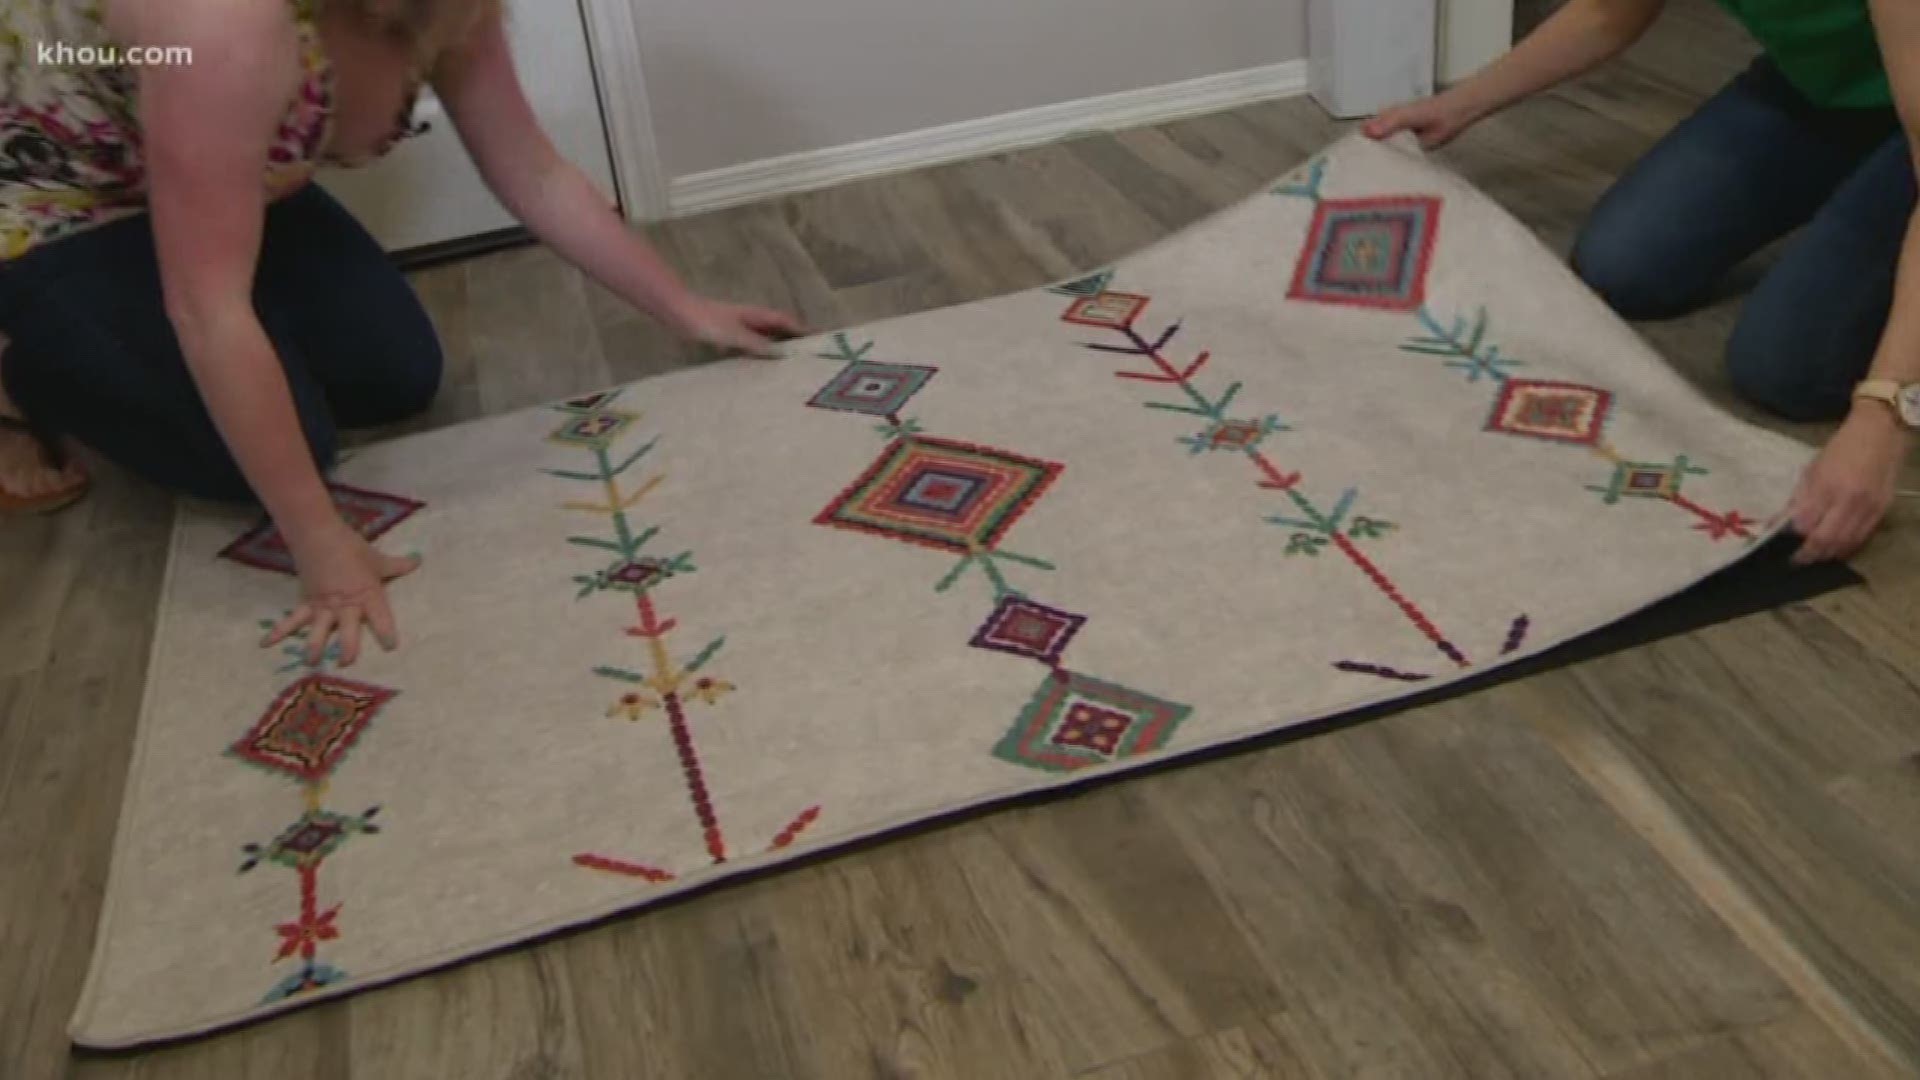 When we heard about a company called Ruggable that sells machine-washable rugs, we had to try it.